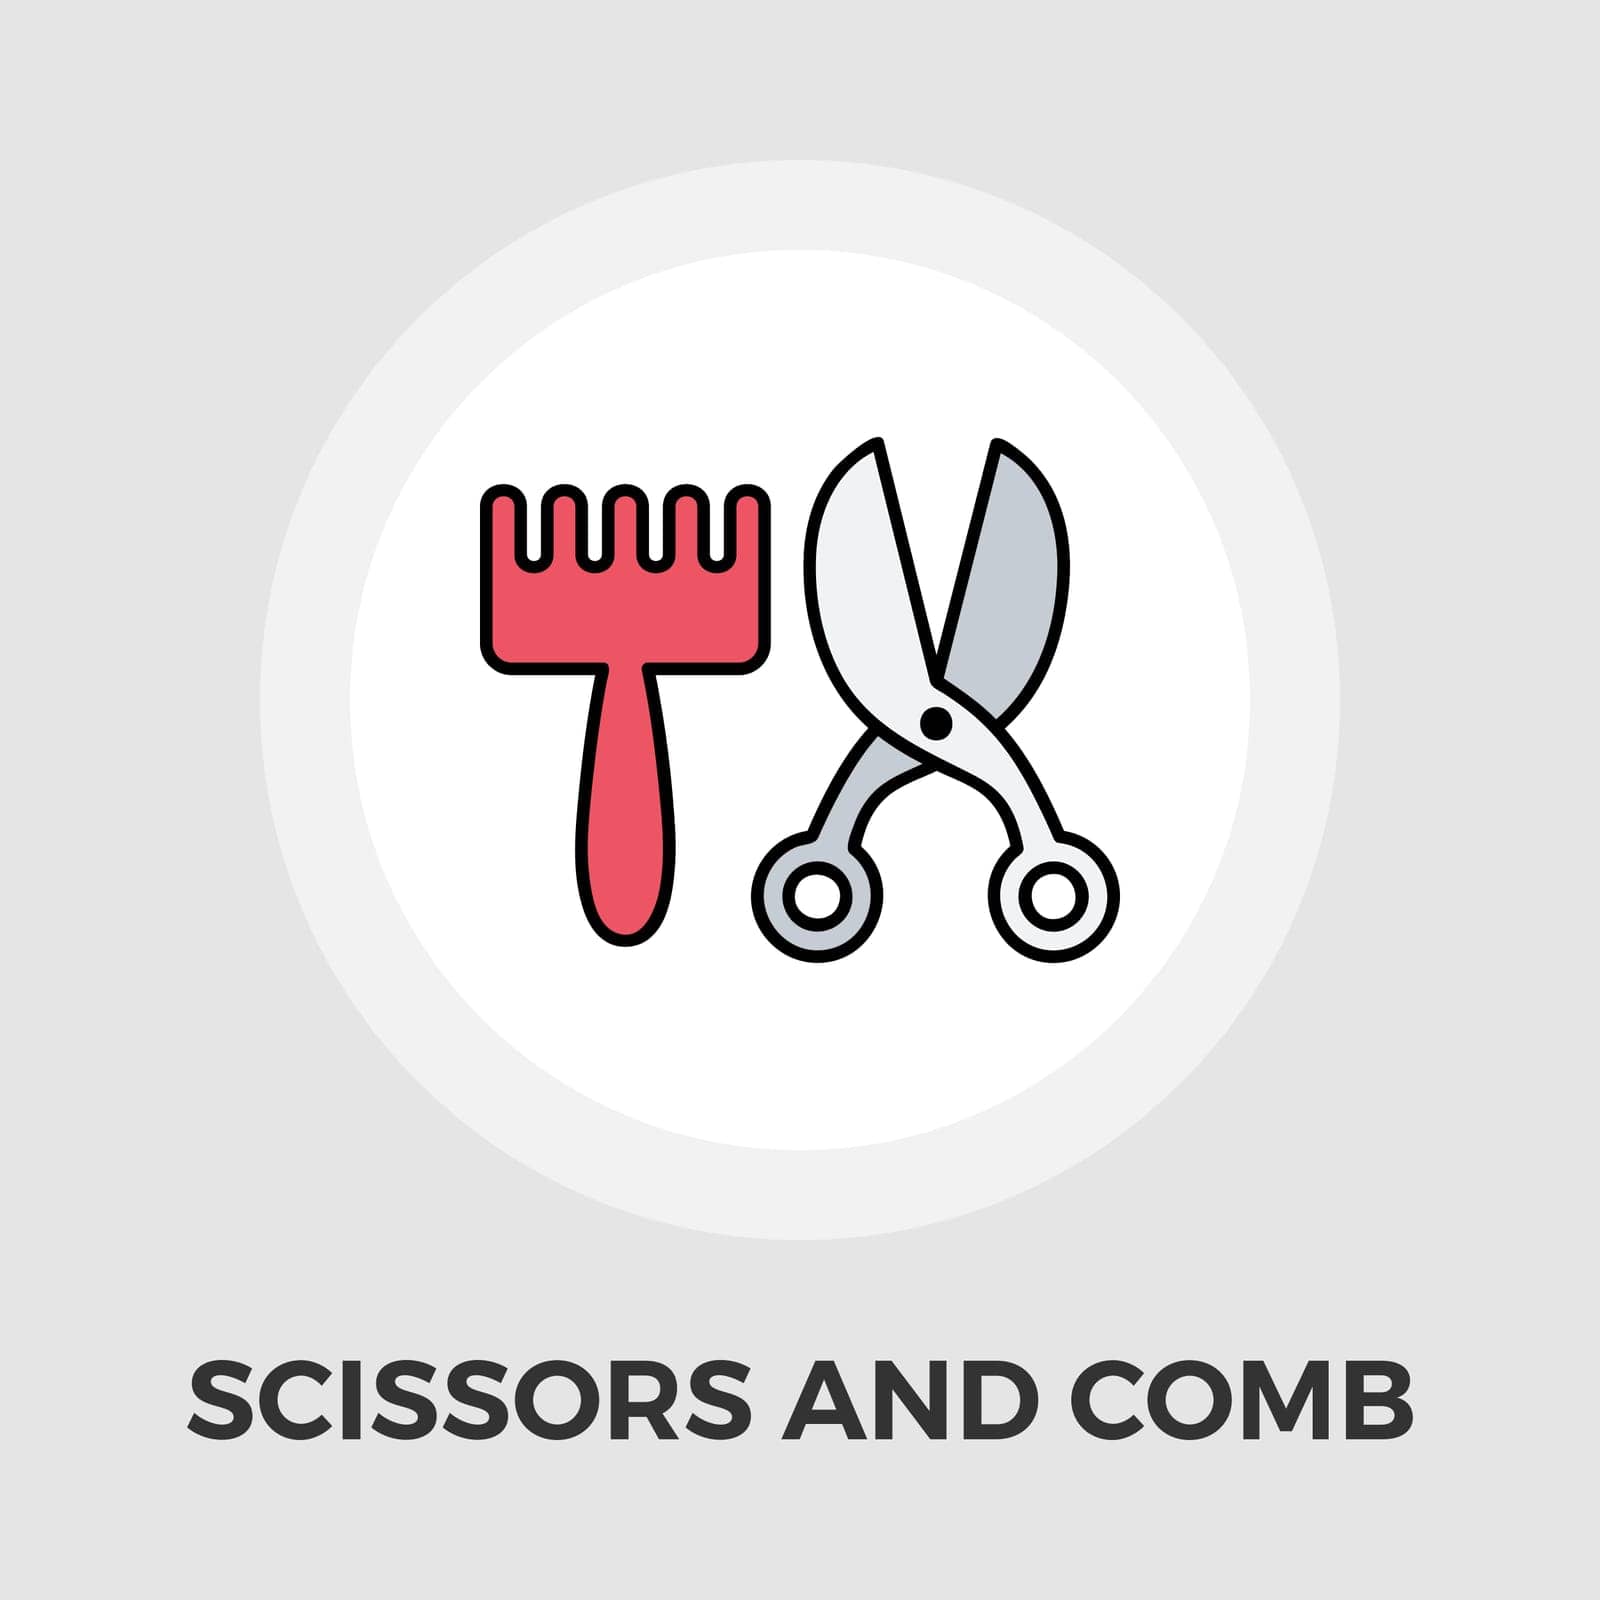 Scissors and comb vector flat icon by smoki